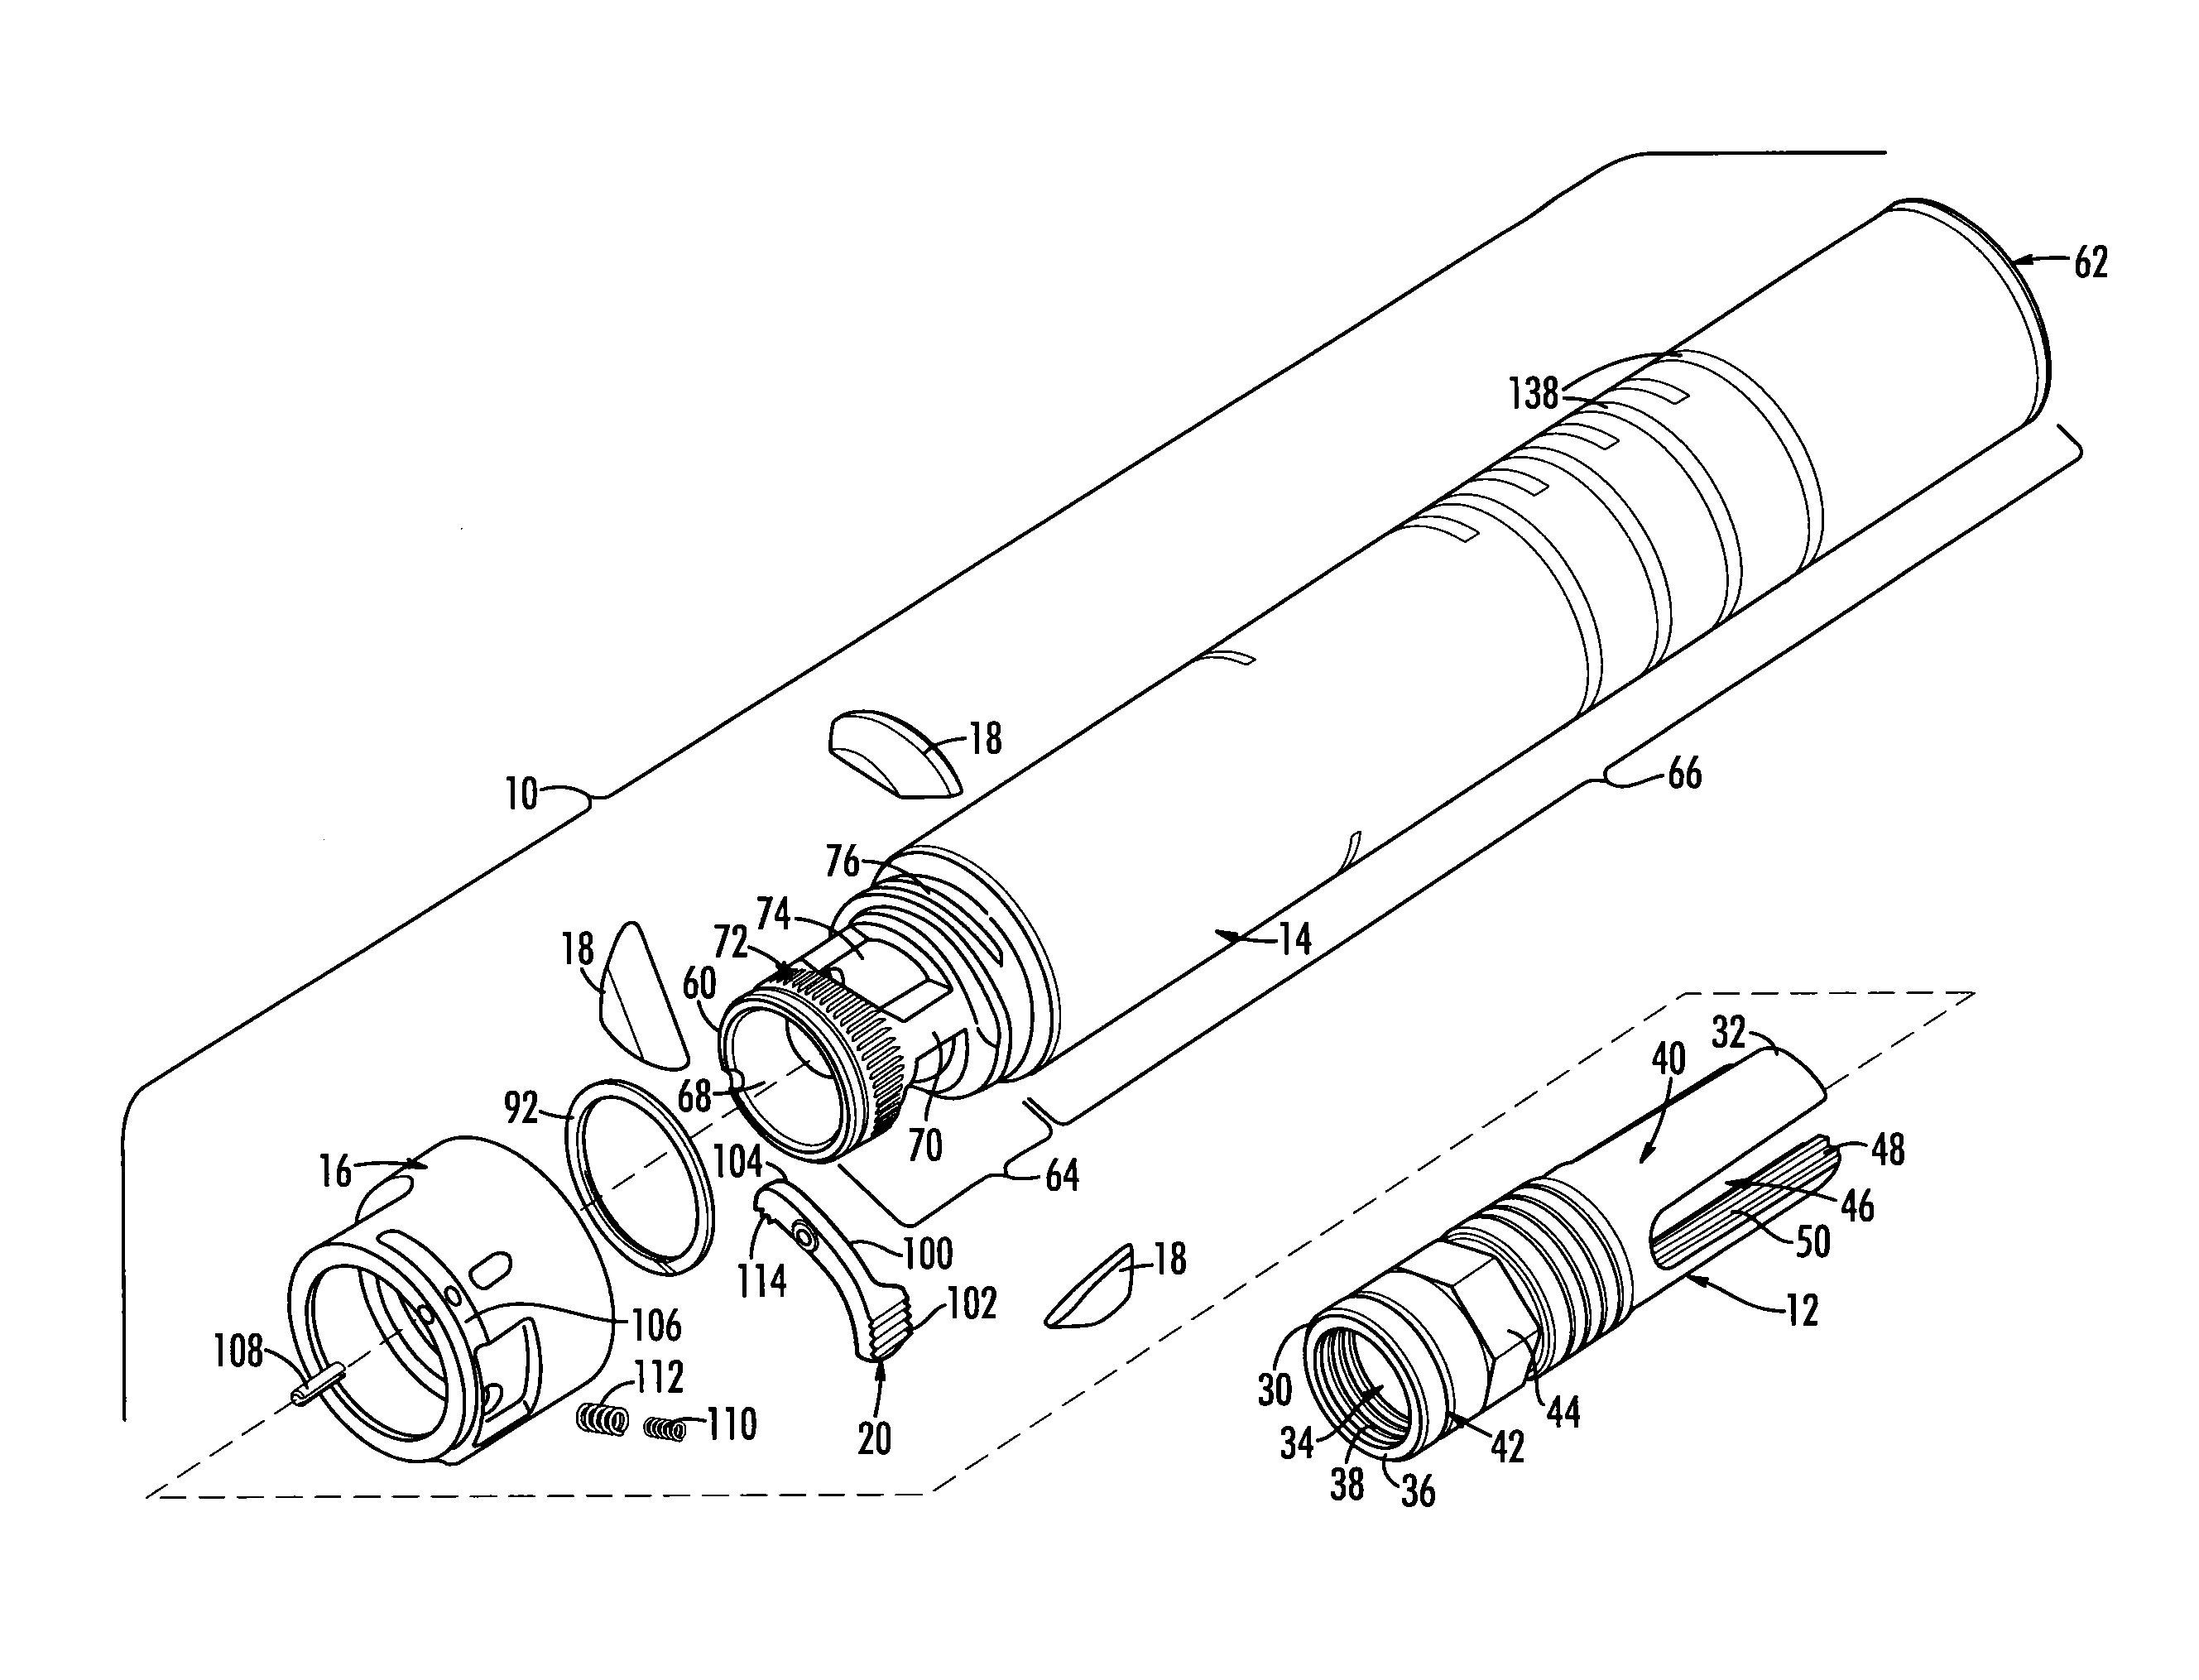 Flash and sound suppressor for a firearm